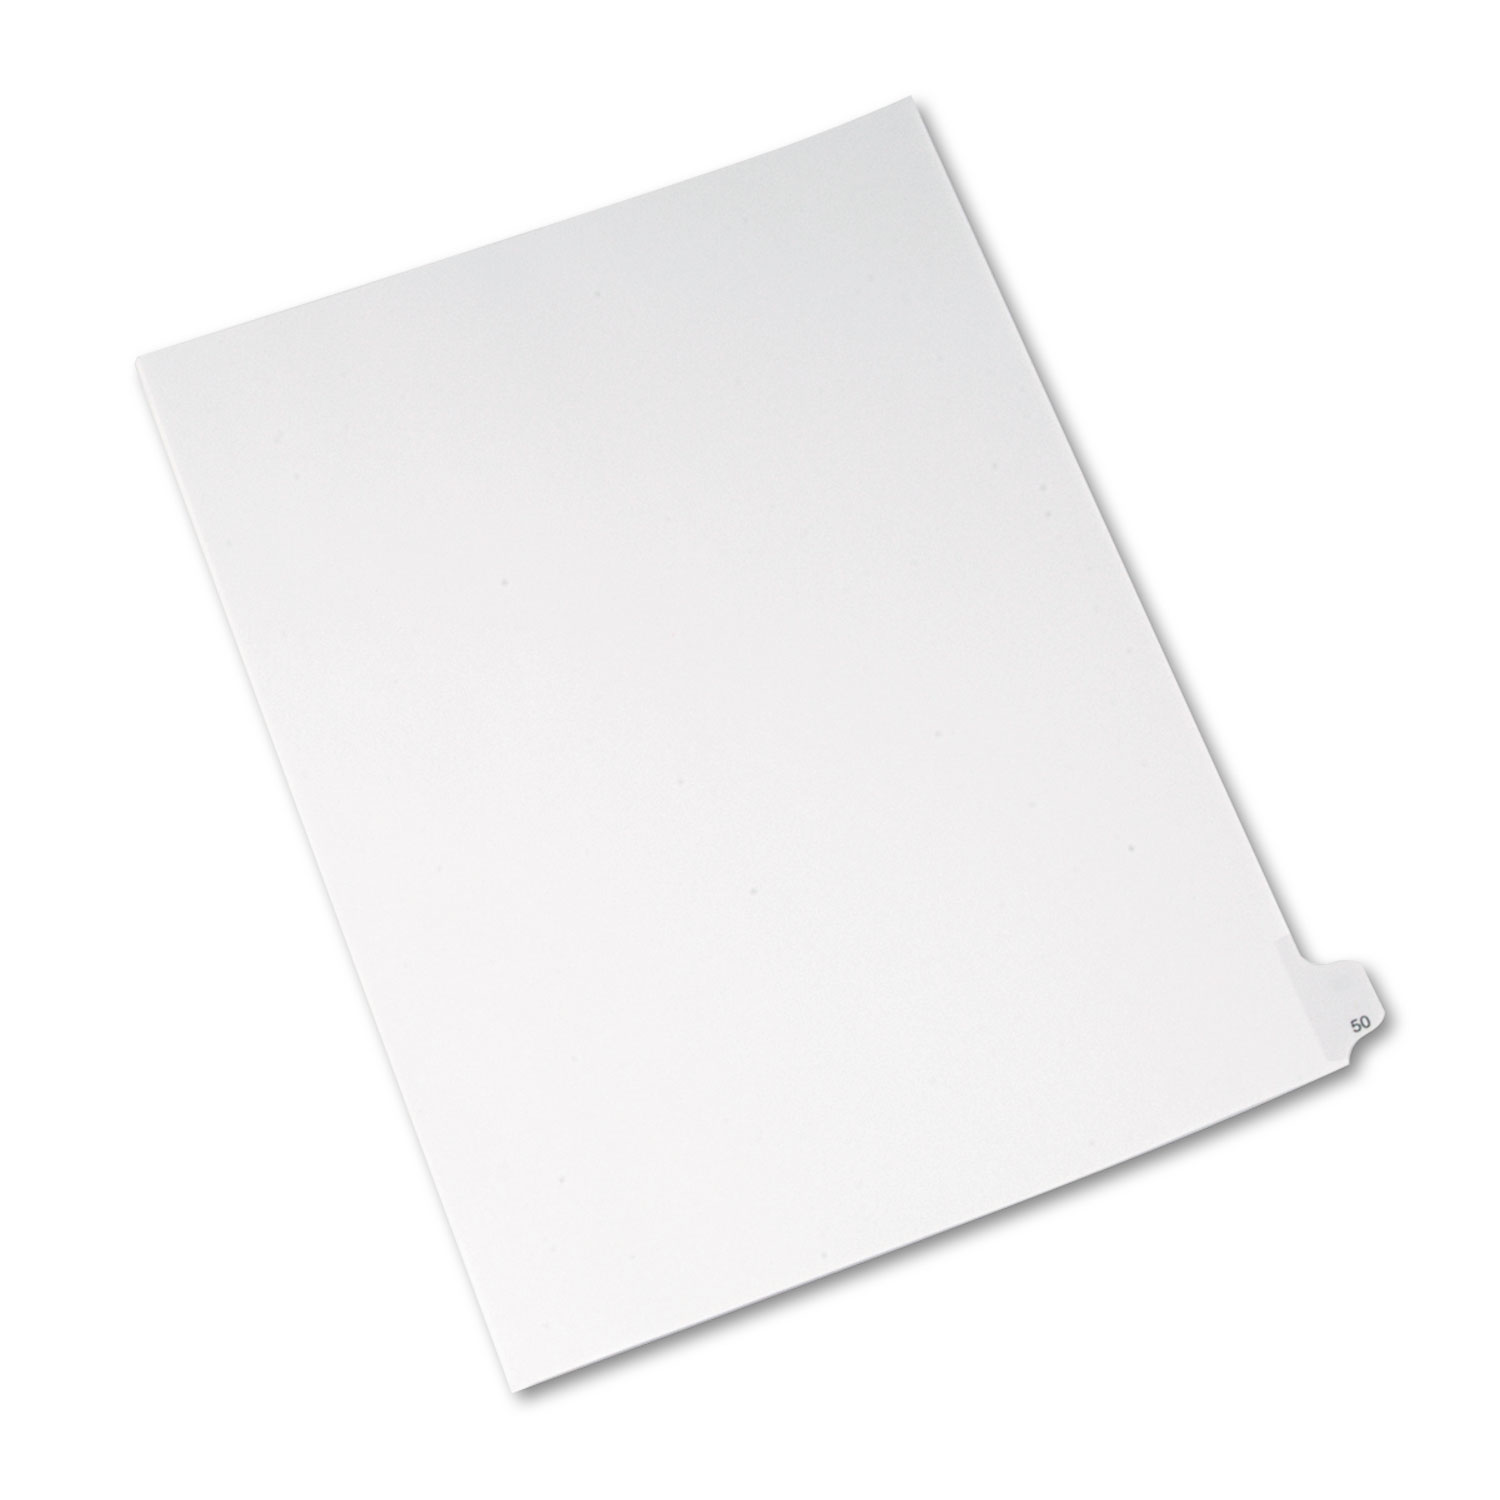 Allstate-Style Legal Exhibit Side Tab Divider, Title: 50, Letter, White, 25/Pack